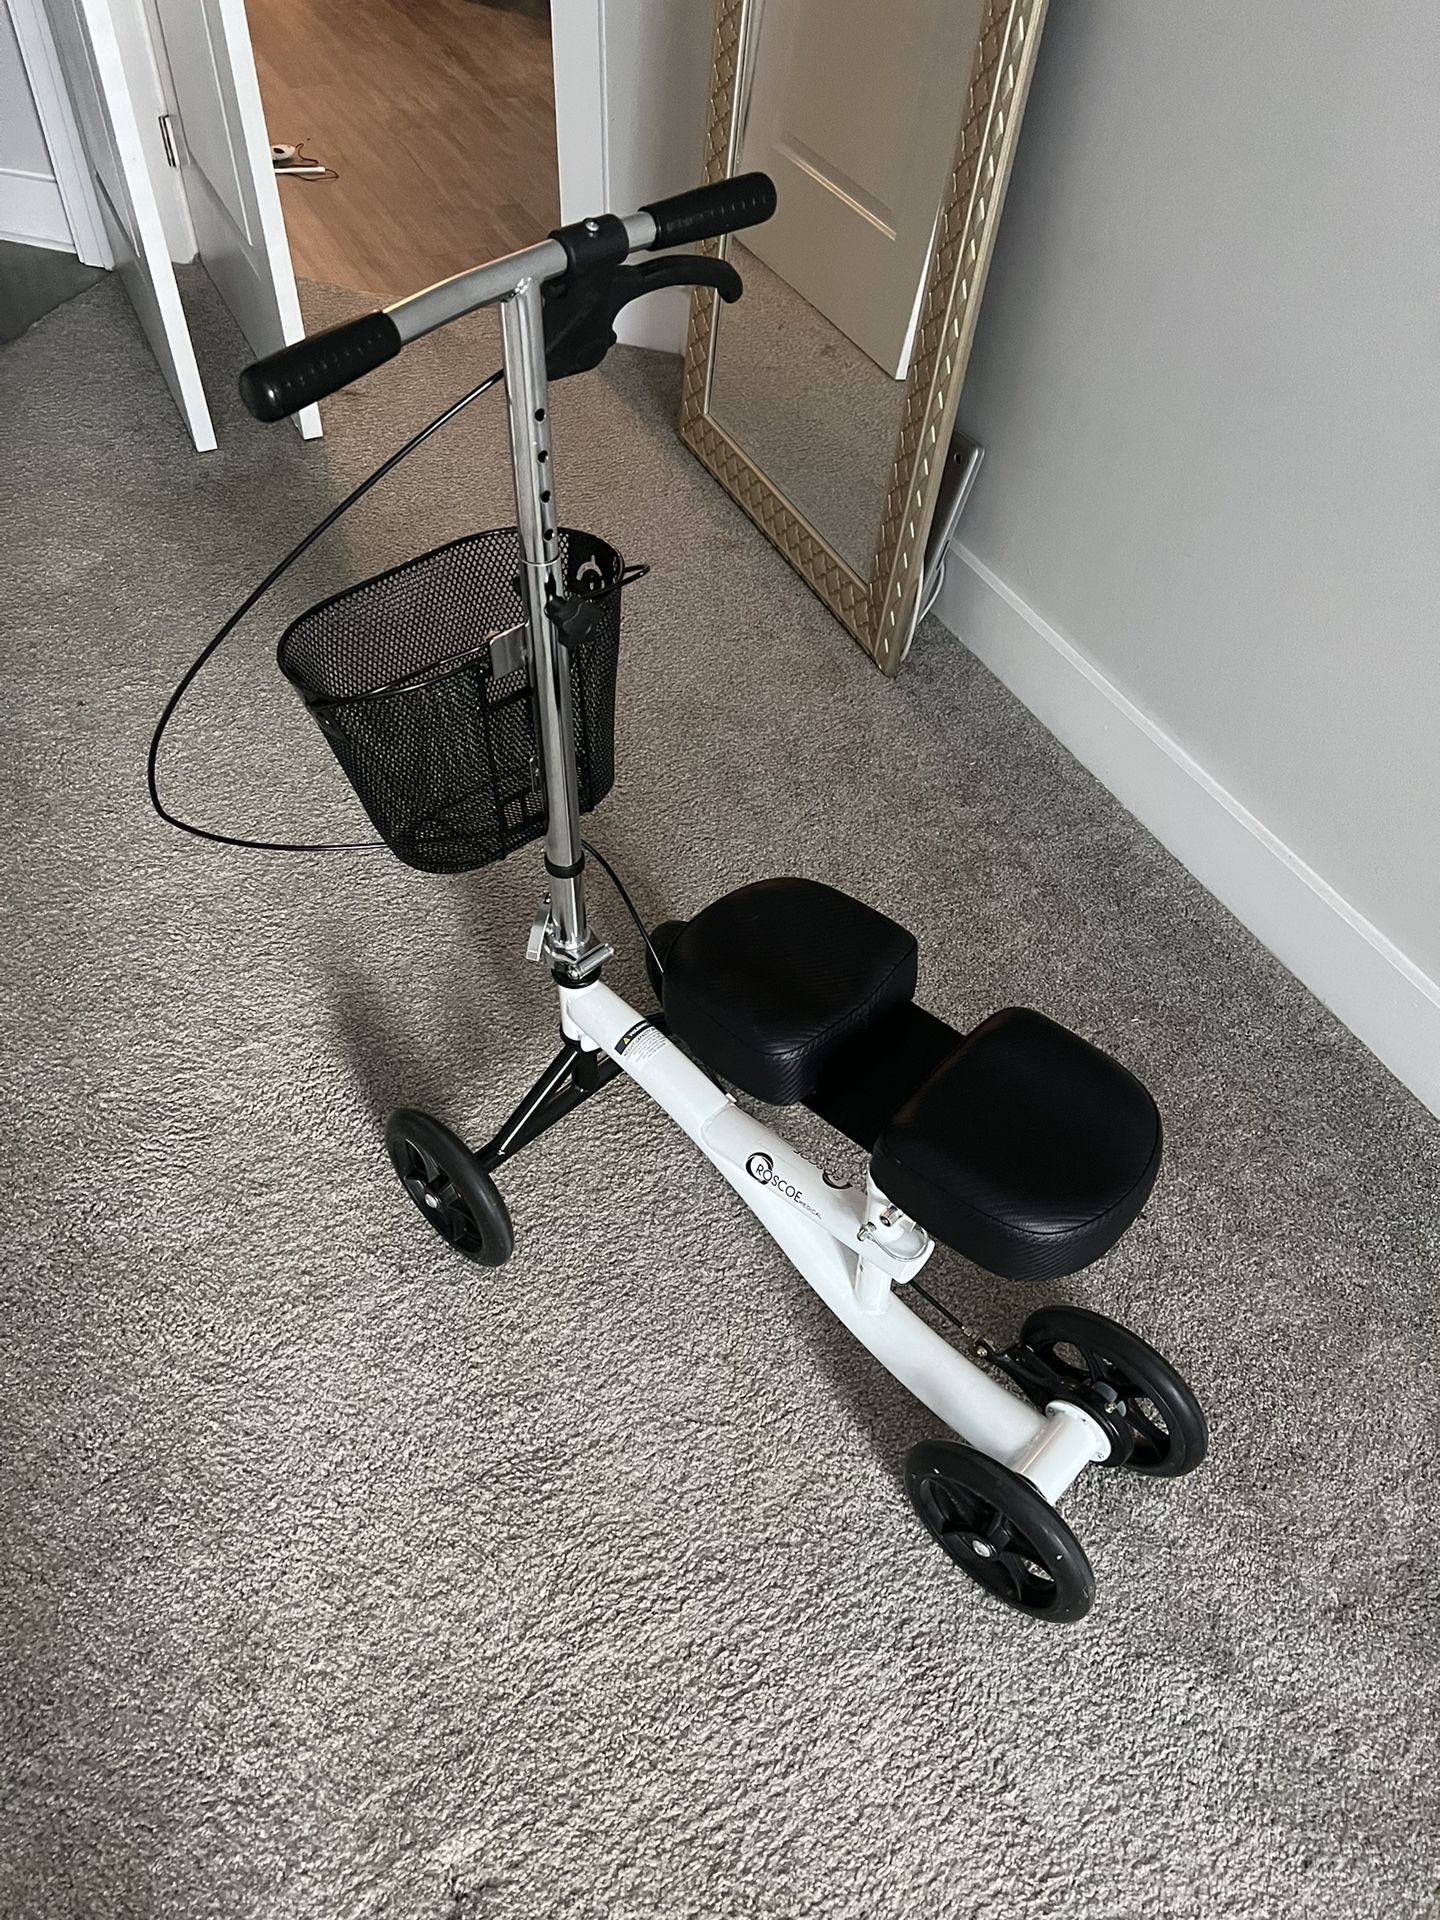 Roscoe Medical Knee Scooter